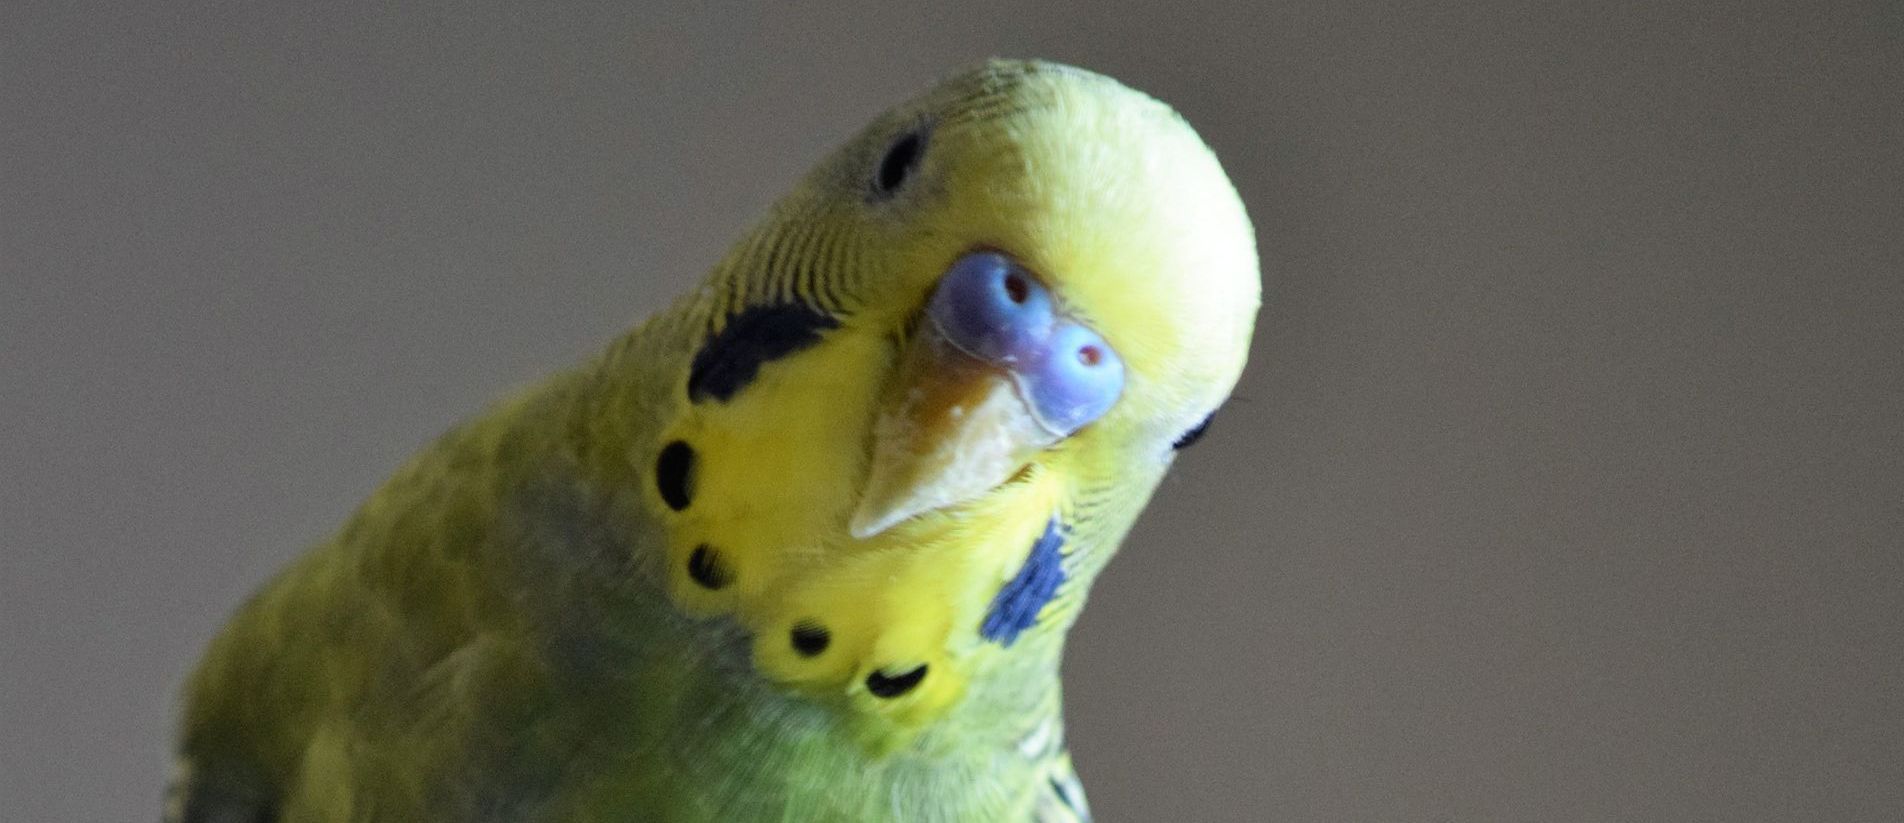  Parakeet is curious. Beautiful bird turns its neck to stare. Intelligent parakeet aware of someone